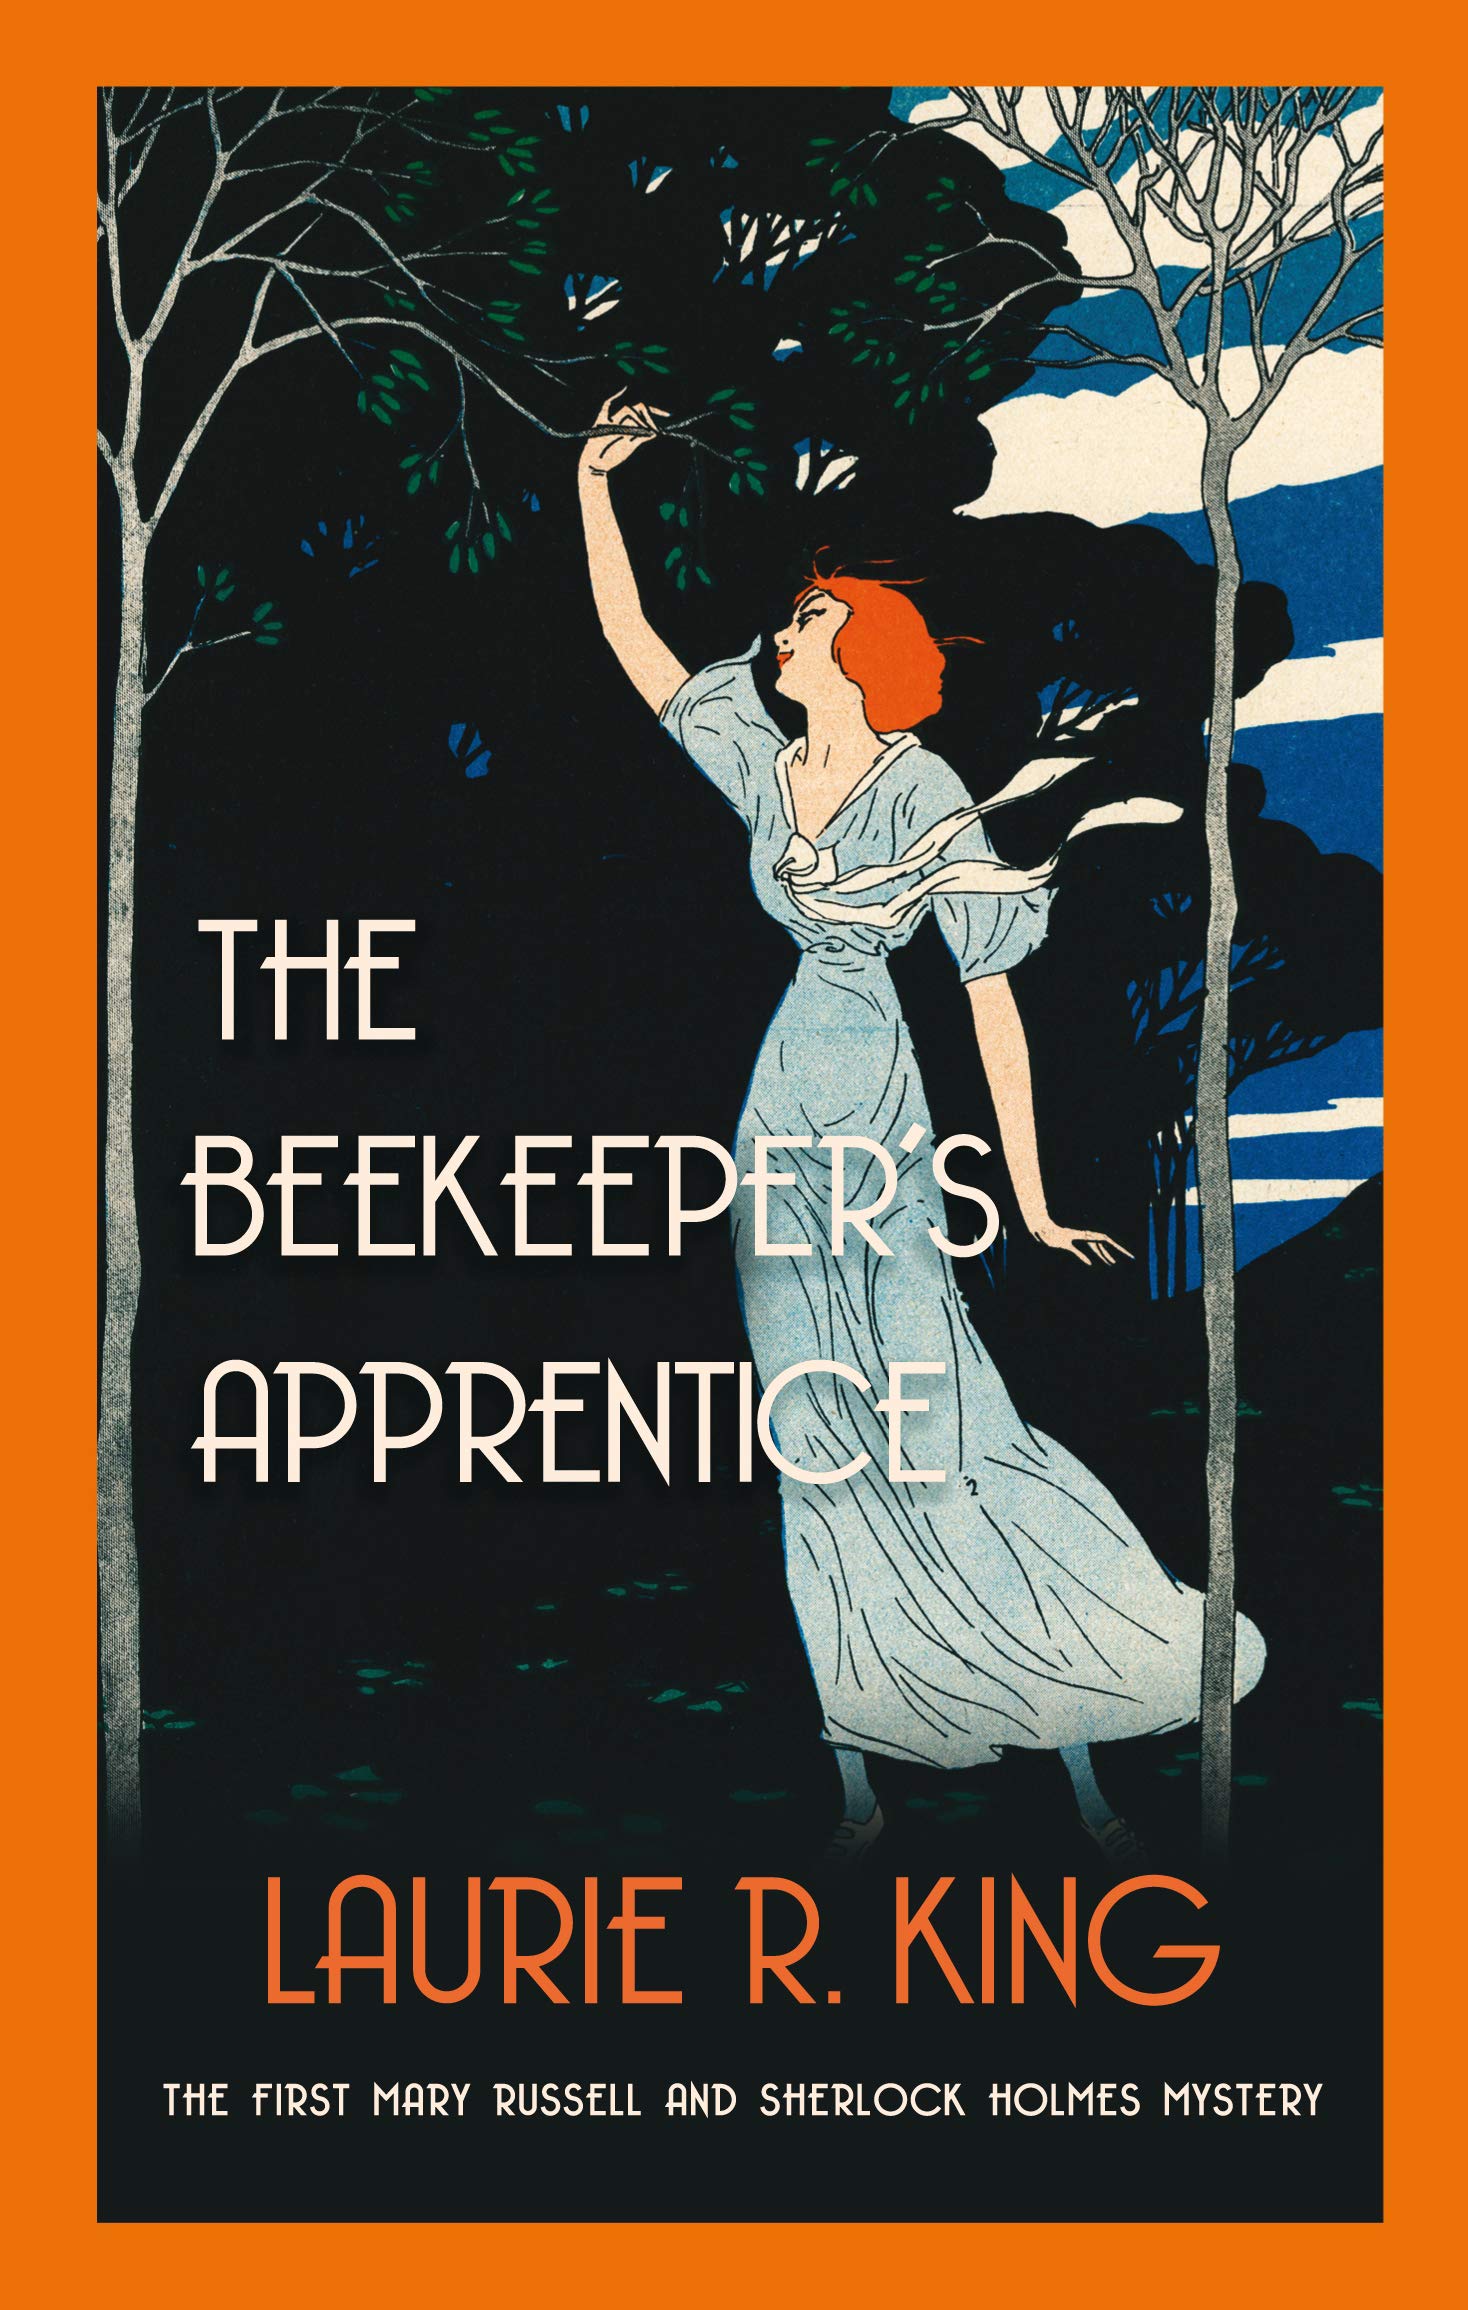 Cover of "The Beekeeper's Apprentice" by Laurie R. King